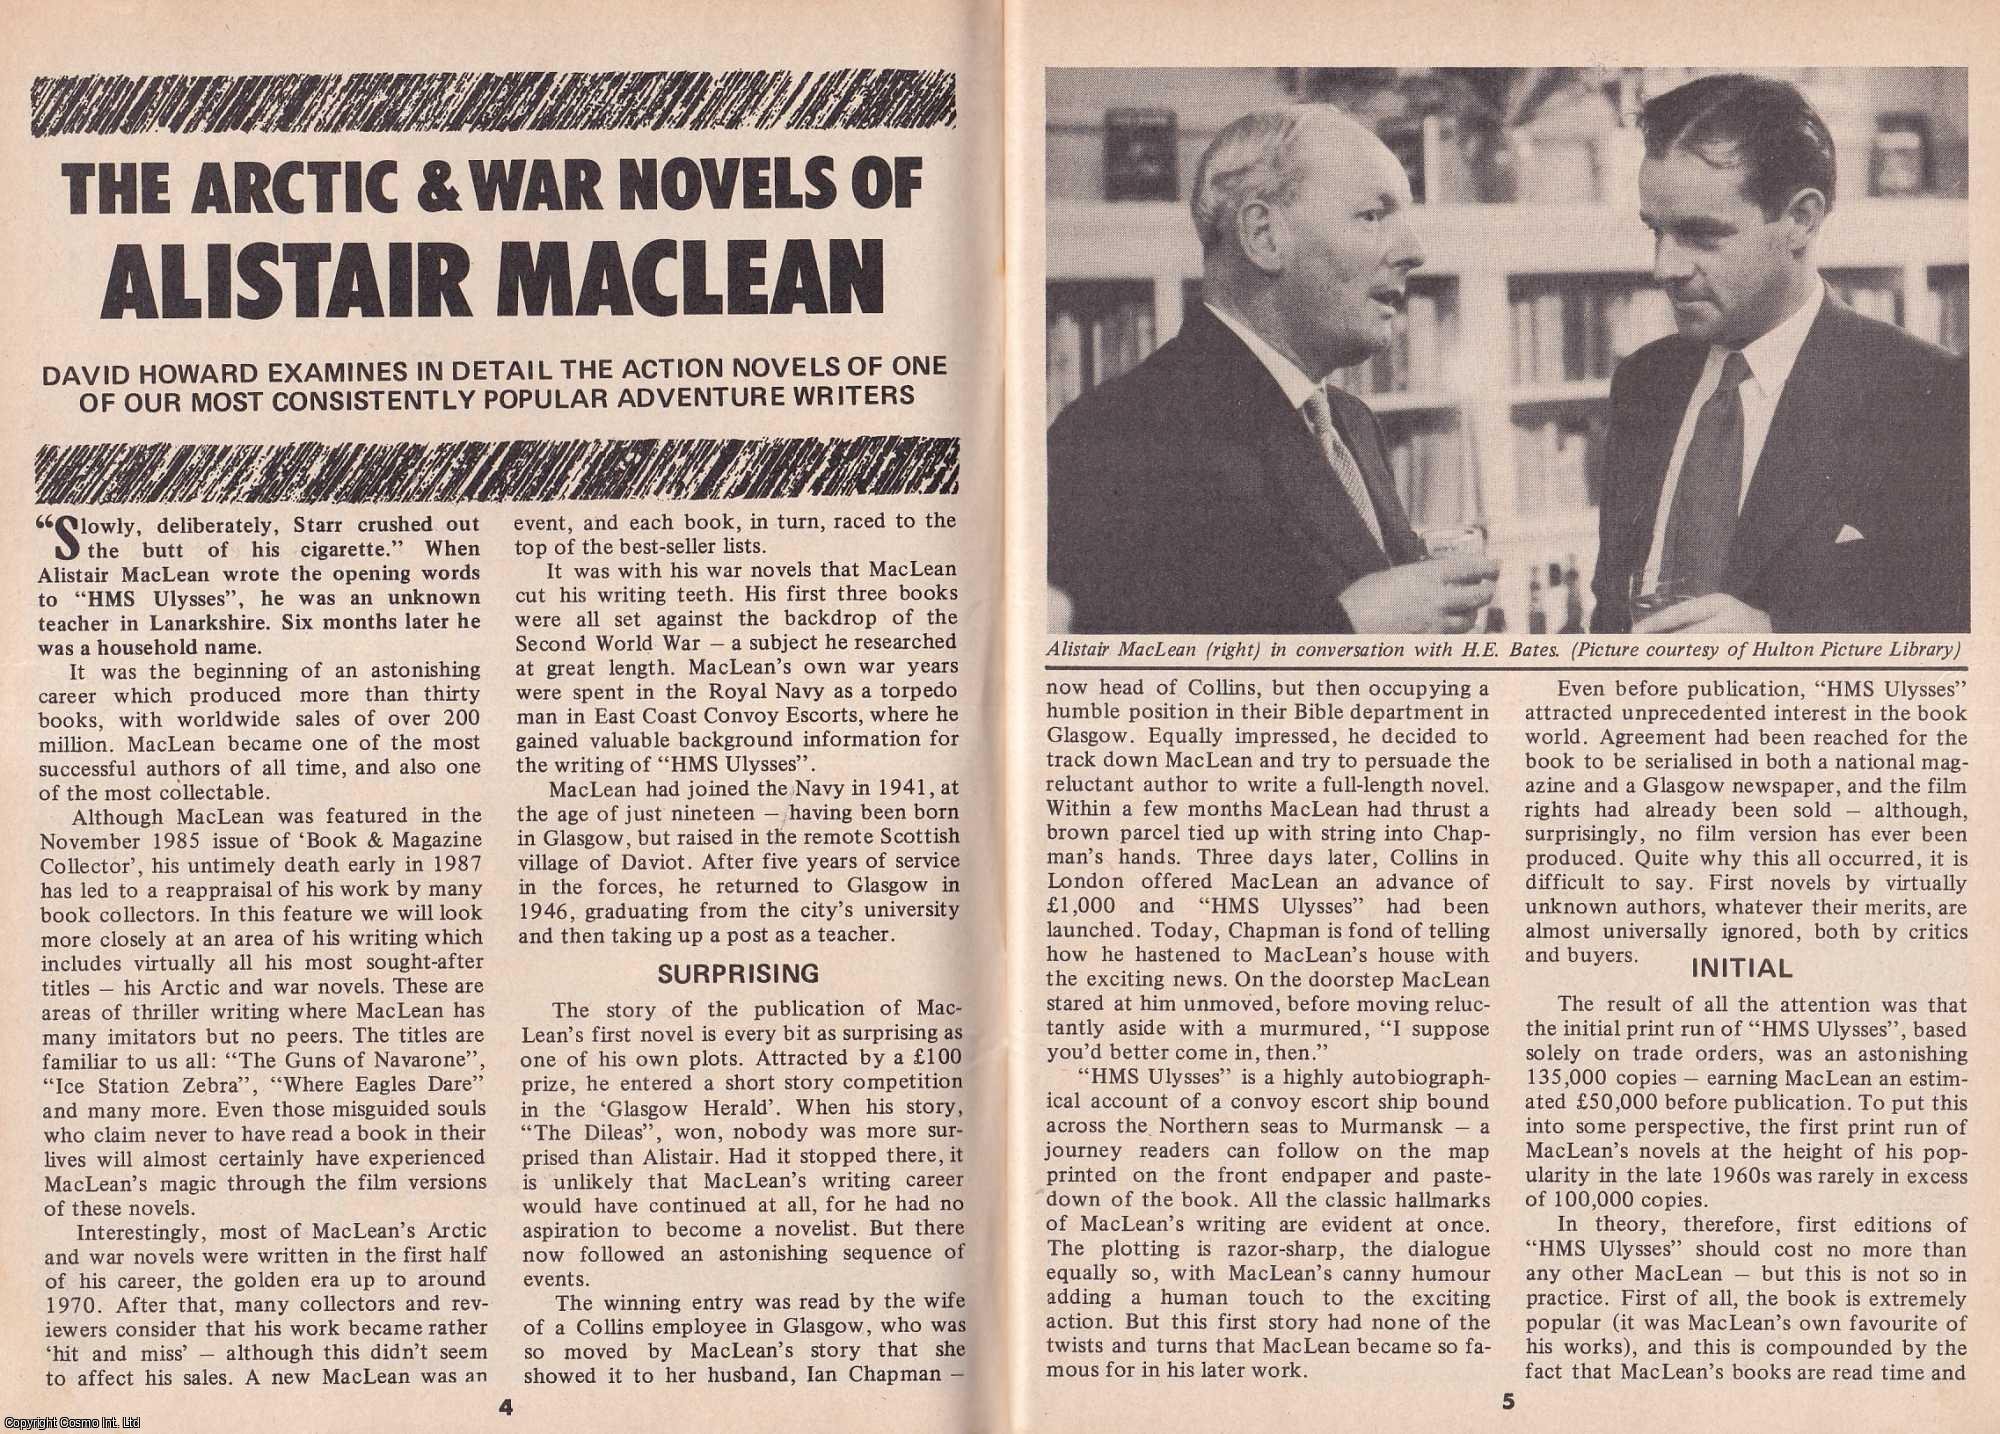 David Howard - Alistair Maclean : The Arctic and War Novels. Examining in Detail The Action Novels. This is an original article separated from an issue of The Book & Magazine Collector publication, 1989.